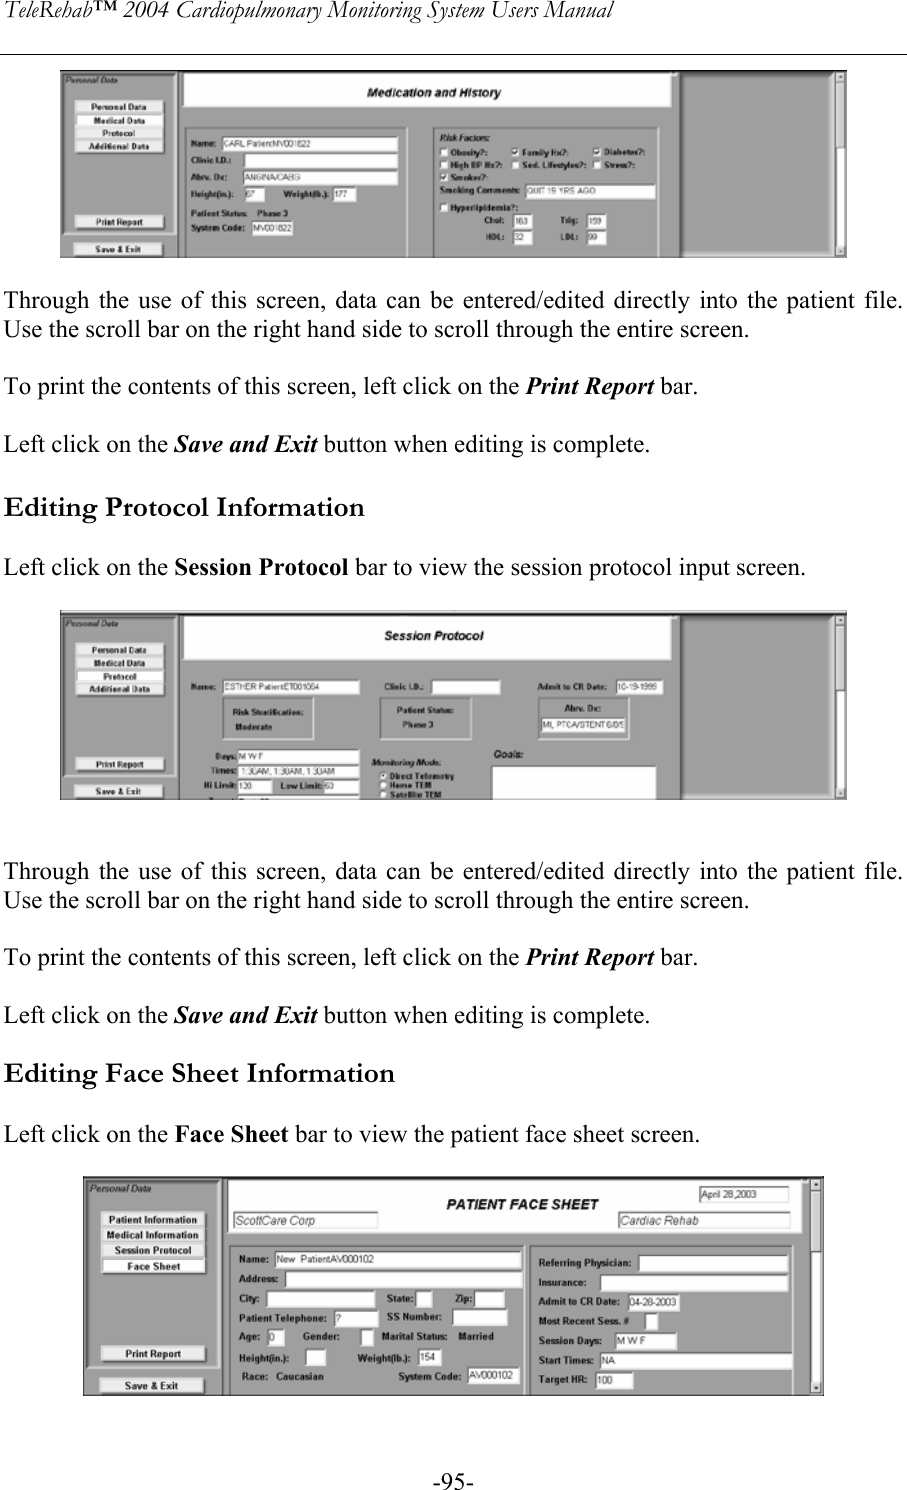 TeleRehab™ 2004 Cardiopulmonary Monitoring System Users Manual    -95-  Through the use of this screen, data can be entered/edited directly into the patient file. Use the scroll bar on the right hand side to scroll through the entire screen.  To print the contents of this screen, left click on the Print Report bar.  Left click on the Save and Exit button when editing is complete.  Editing Protocol Information  Left click on the Session Protocol bar to view the session protocol input screen.     Through the use of this screen, data can be entered/edited directly into the patient file. Use the scroll bar on the right hand side to scroll through the entire screen.  To print the contents of this screen, left click on the Print Report bar.  Left click on the Save and Exit button when editing is complete.  Editing Face Sheet Information  Left click on the Face Sheet bar to view the patient face sheet screen.   